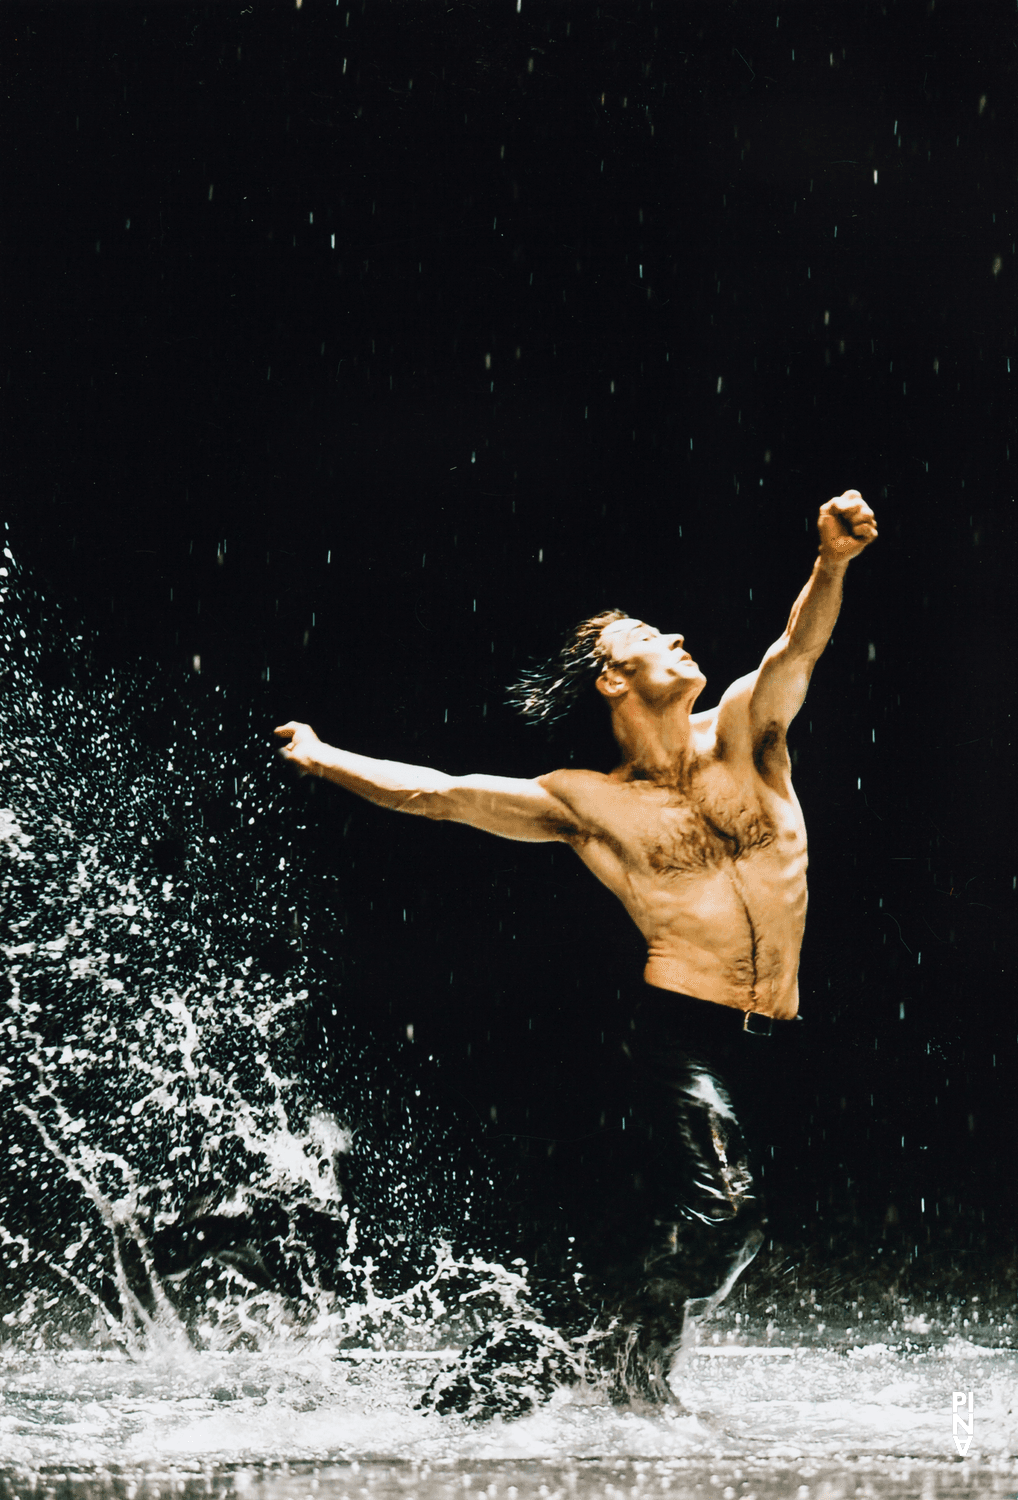 Rainer Behr in “Vollmond (Full Moon)” by Pina Bausch, May 11, 2006